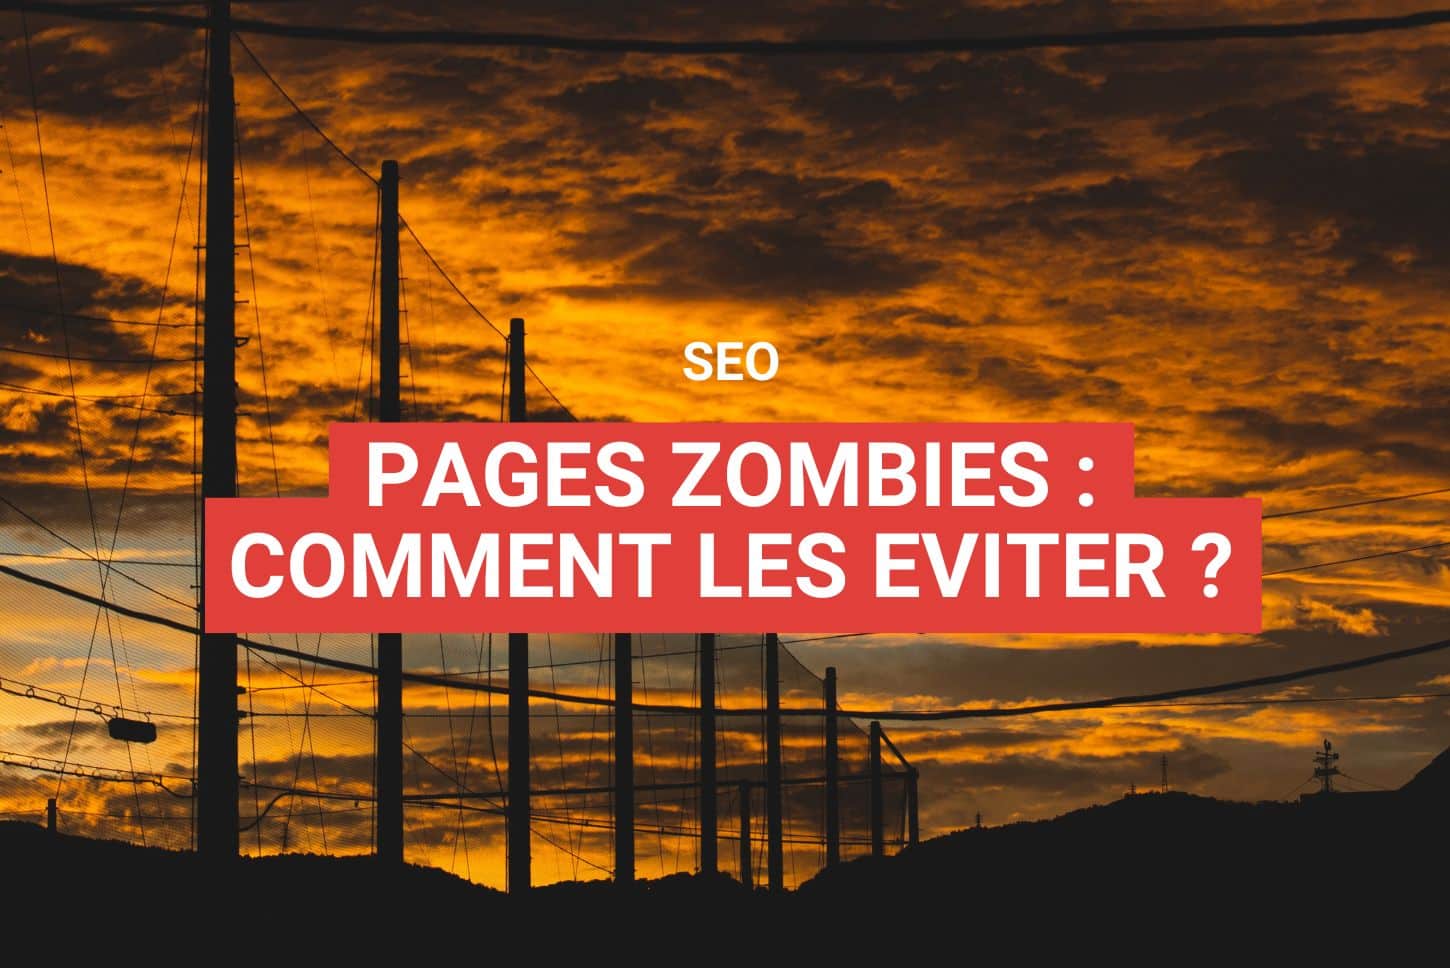 seo pages zombies